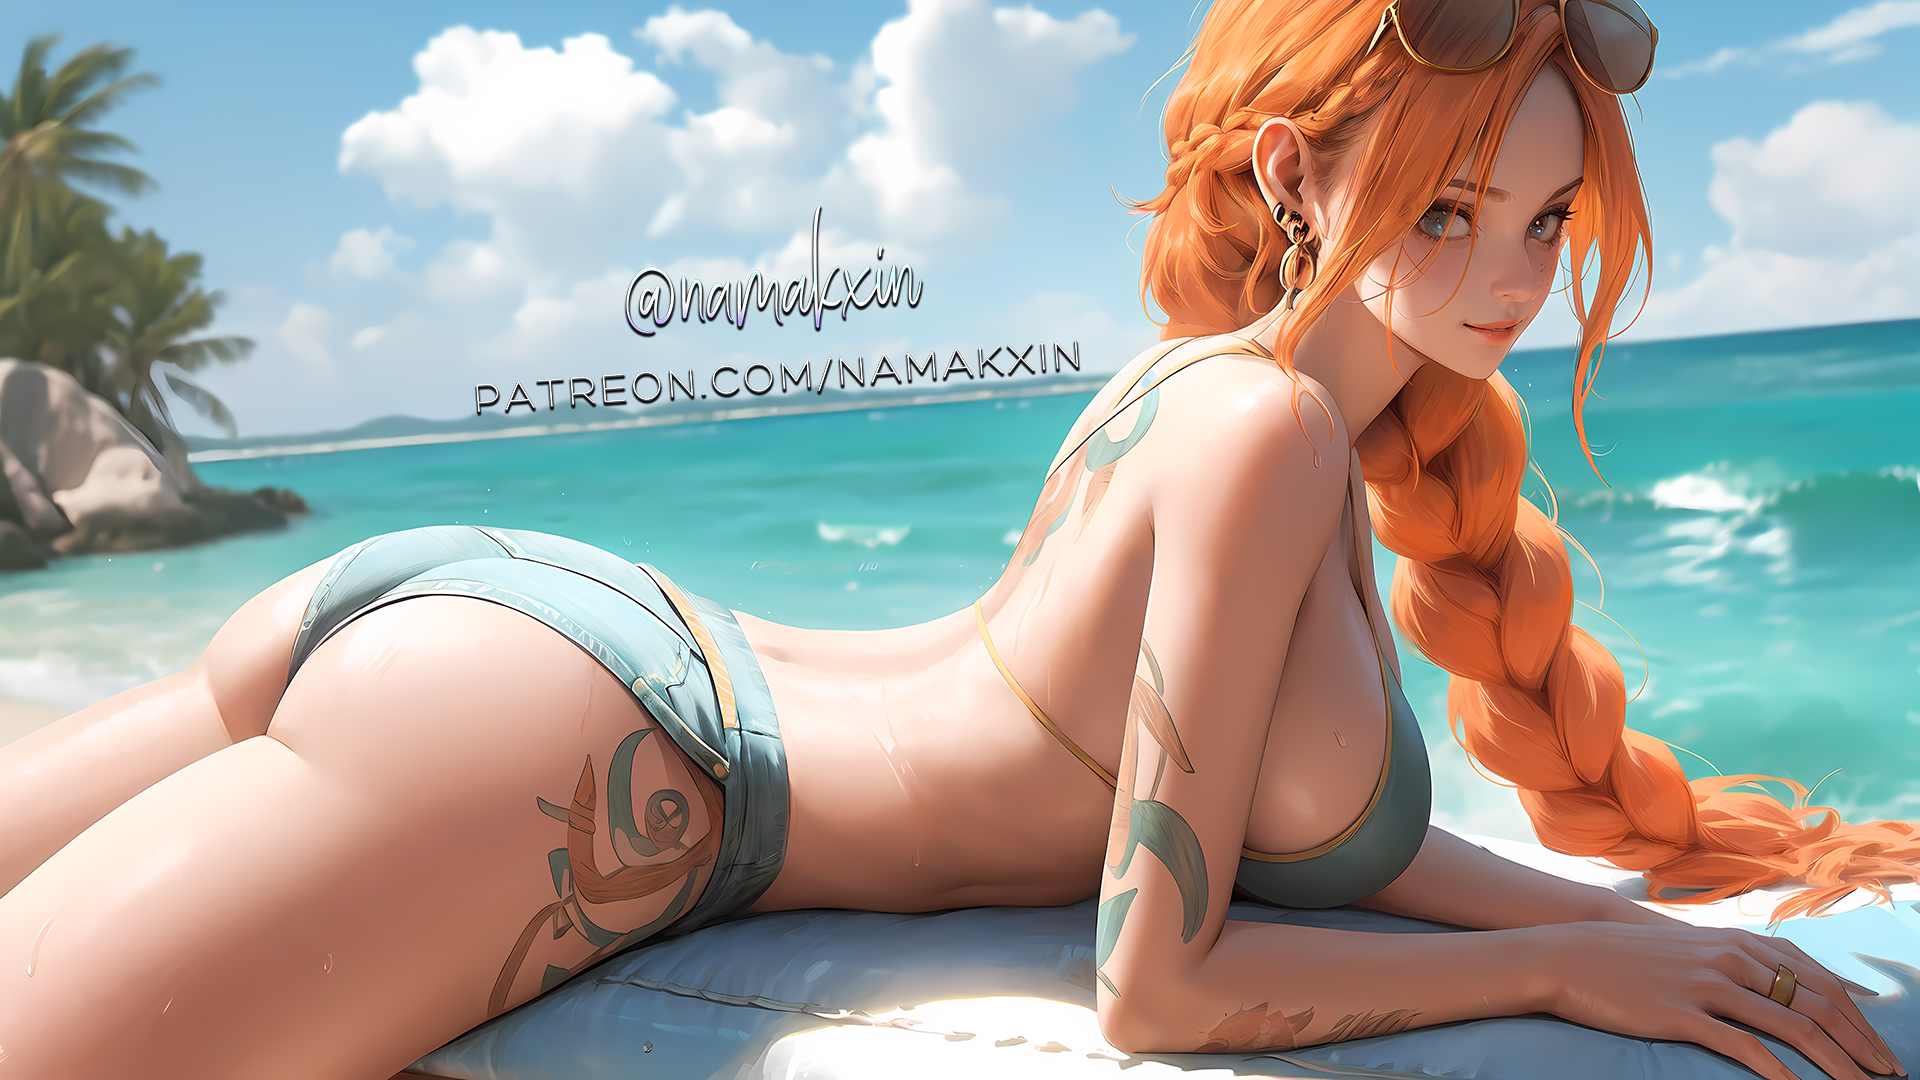 General 1920x1080 big boobs AI art redhead lying on front ass looking at viewer One Piece Nami braids sky clouds water watermarked earring long hair sunglasses bikini tattoo lying down rings